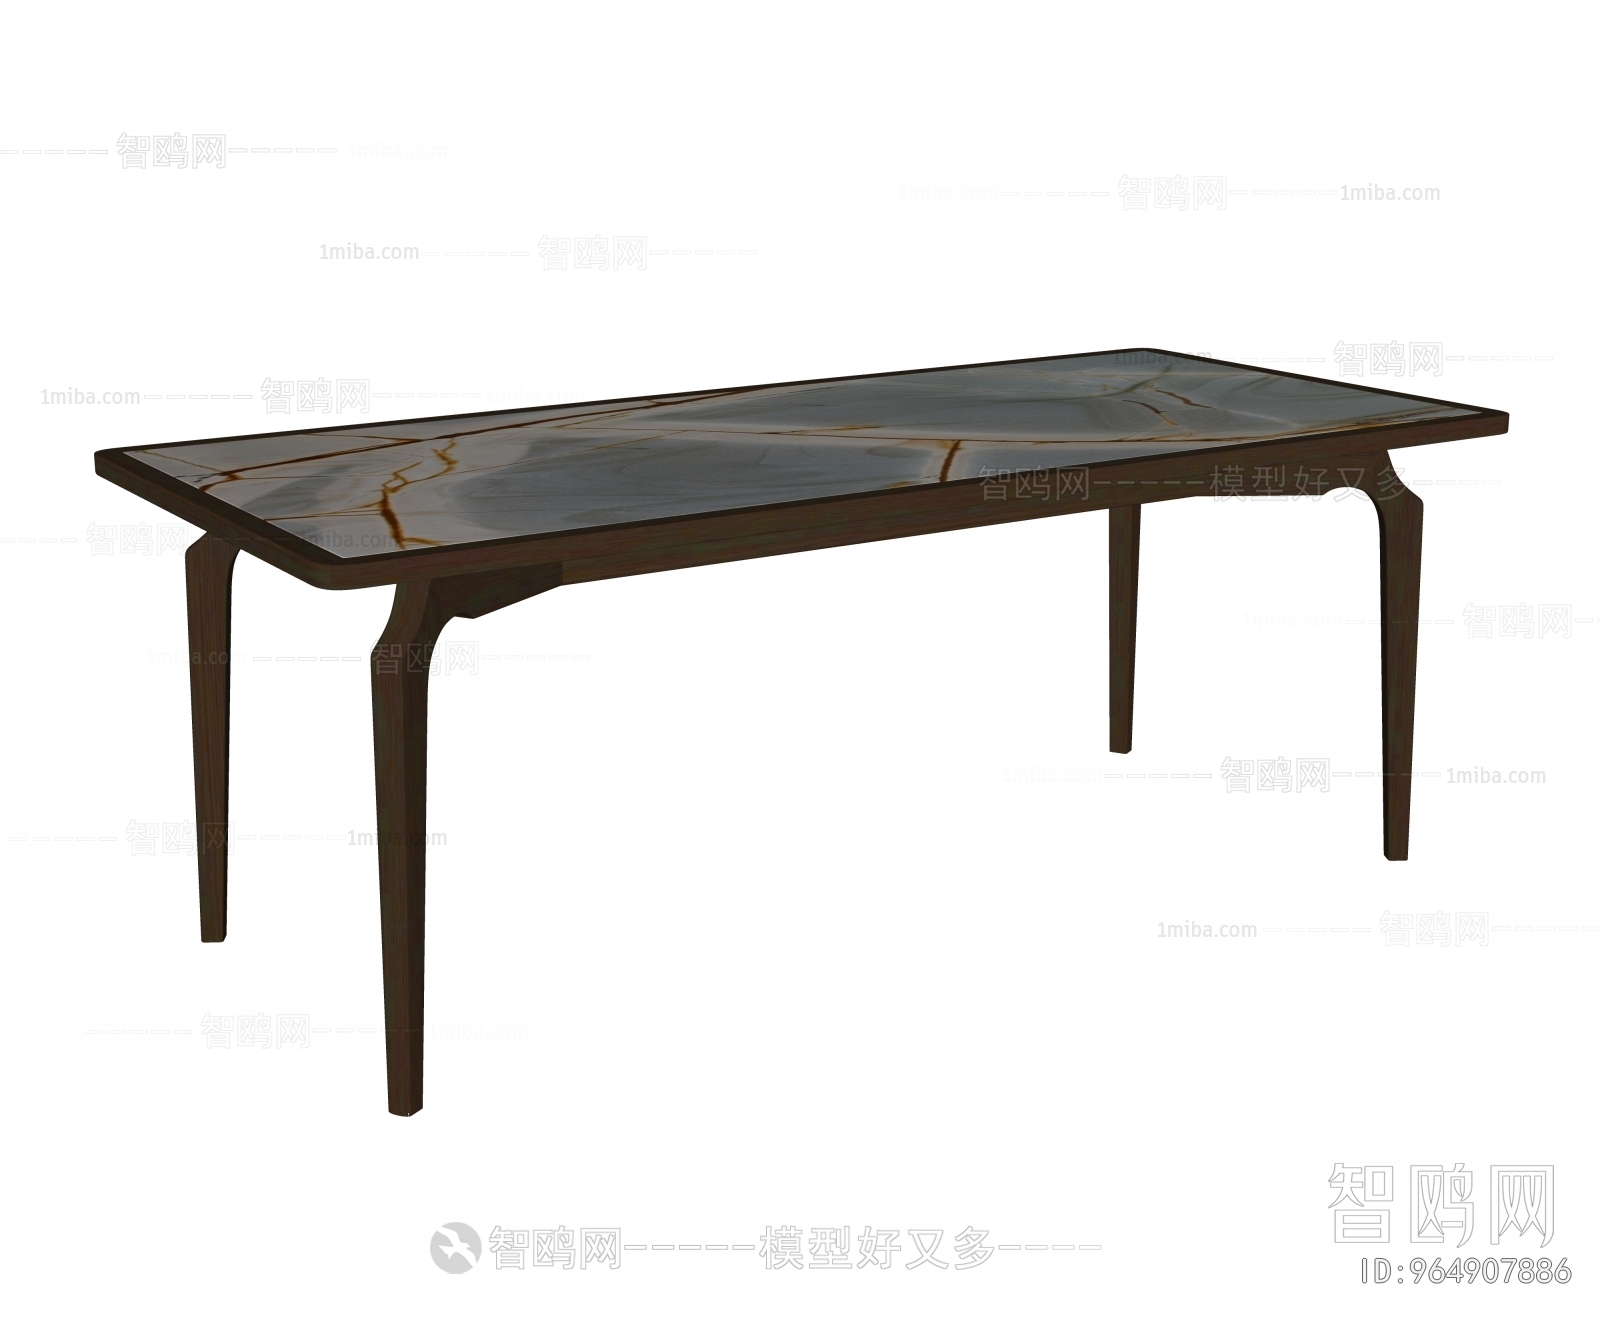 New Chinese Style Dining Table